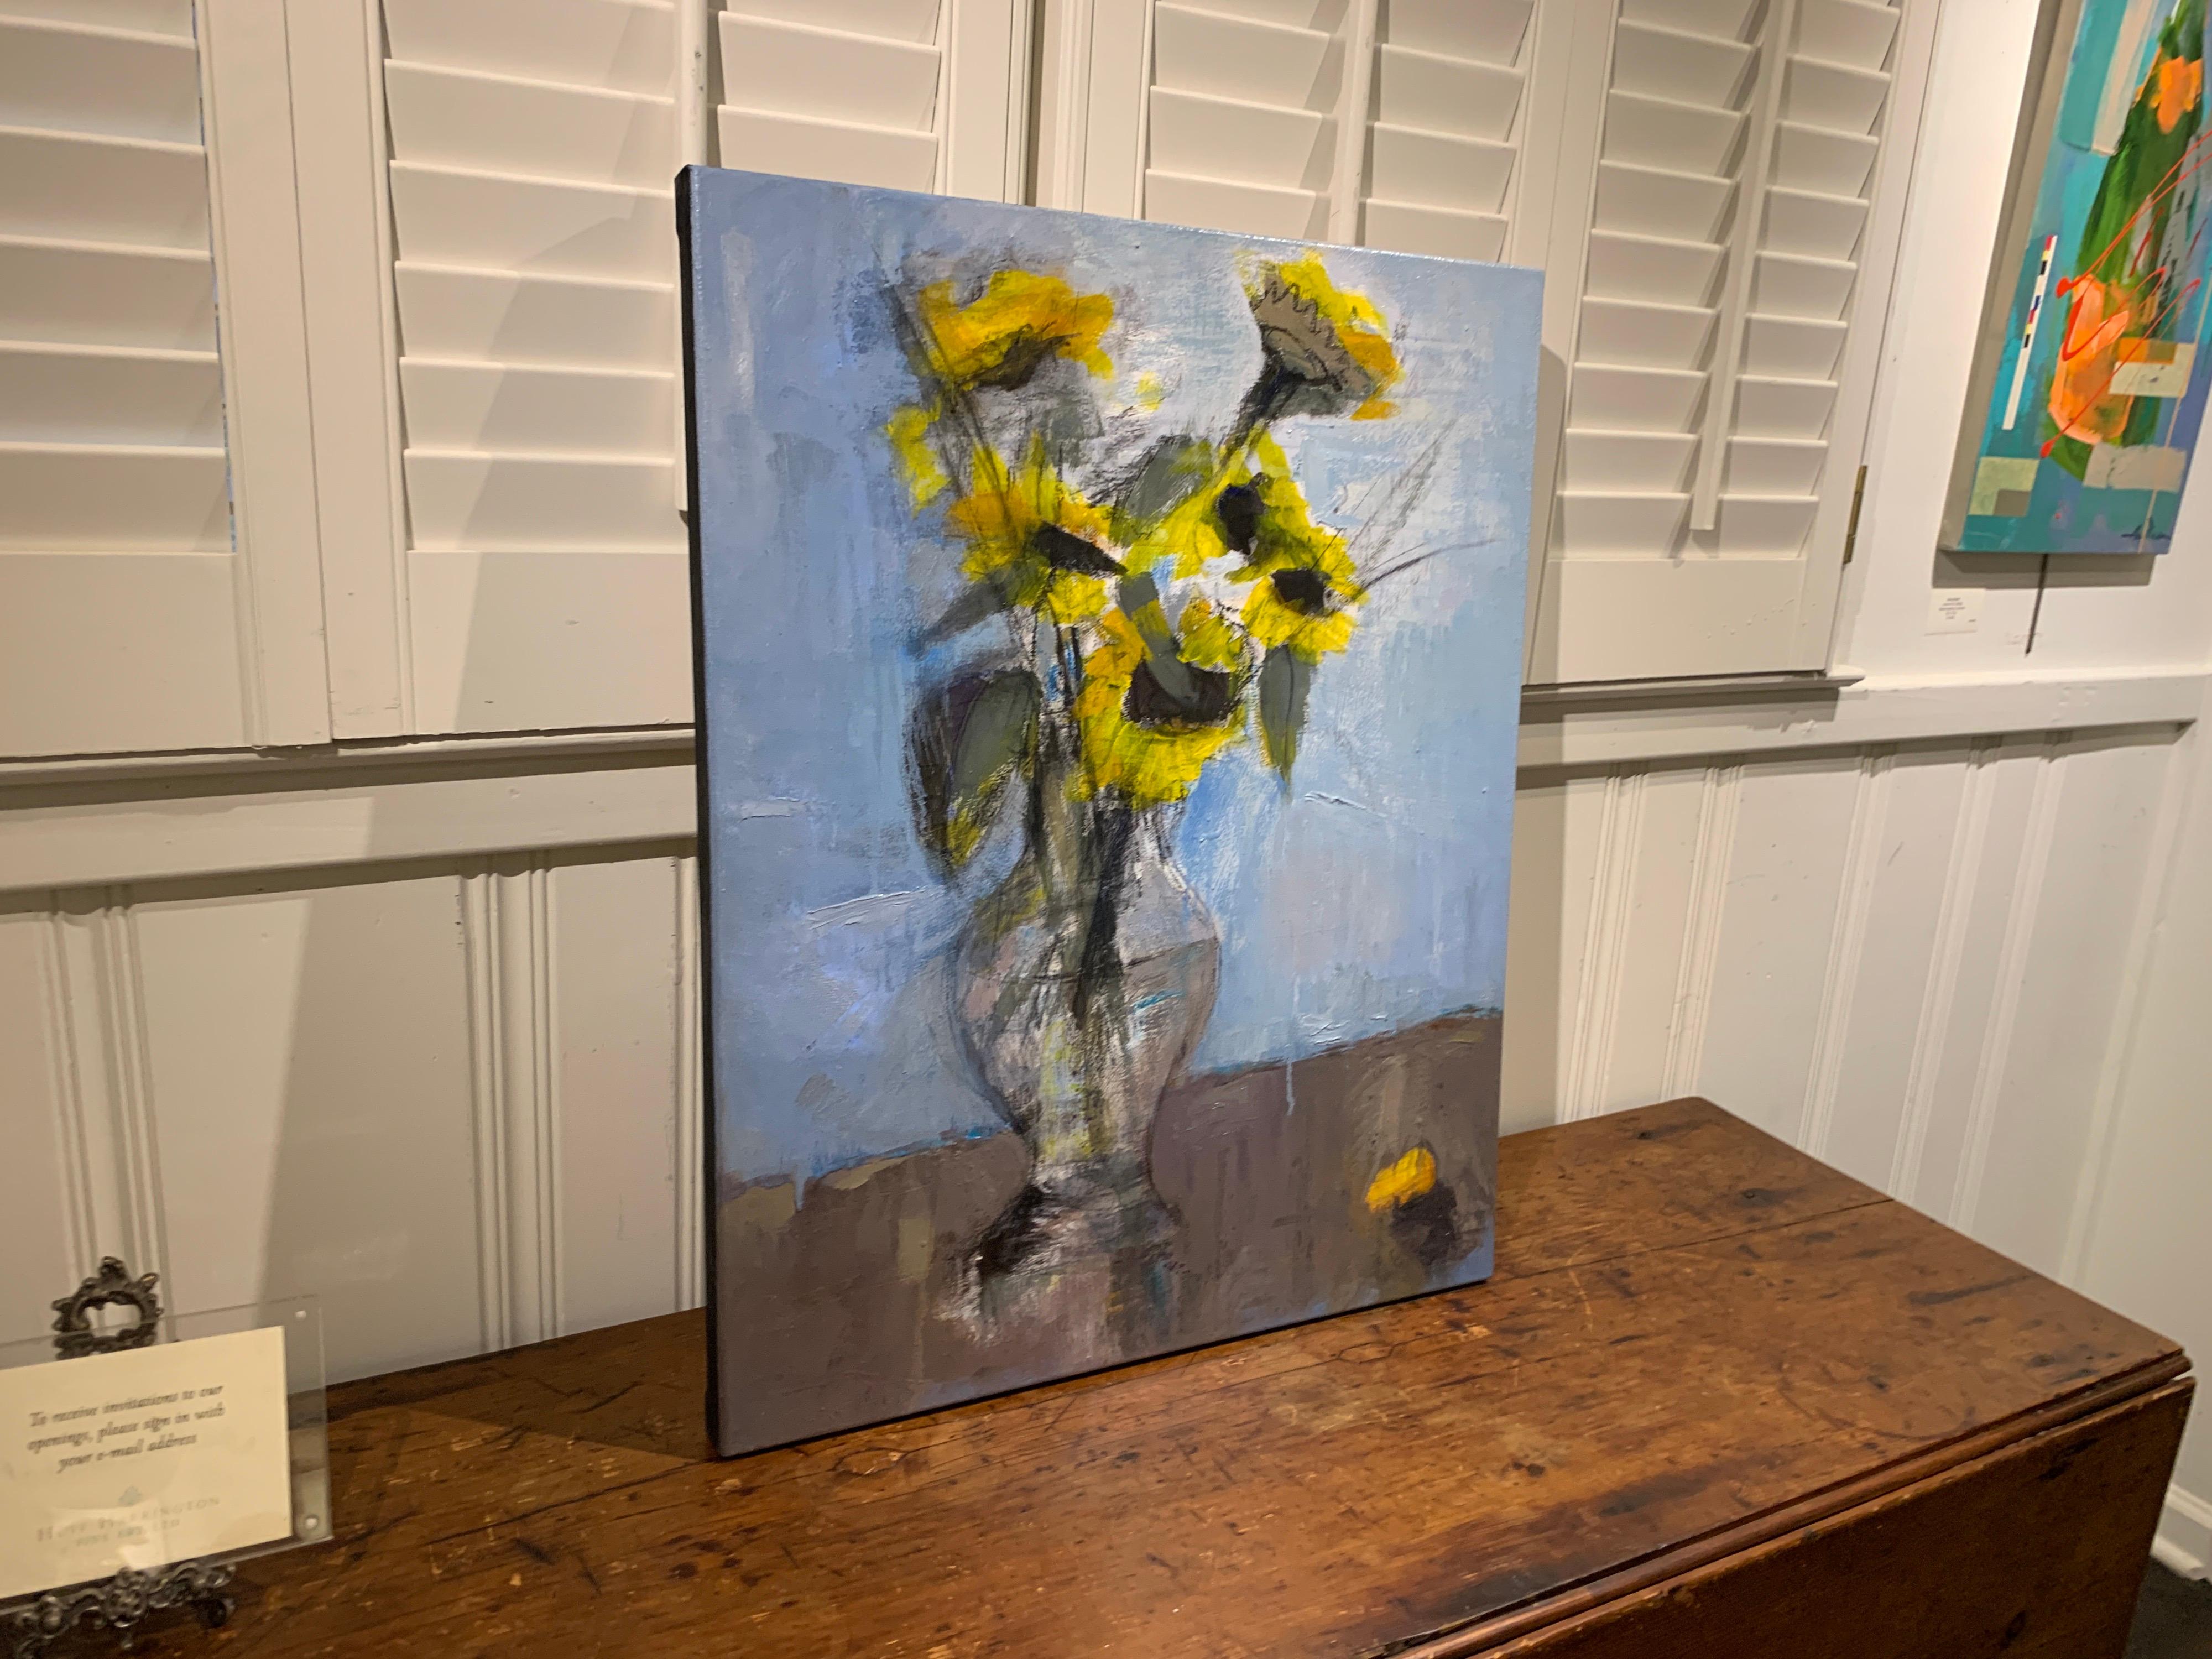 Farmers Market Sunflowers by Sharon Hockfield, Contemporary Floral Still Life 6